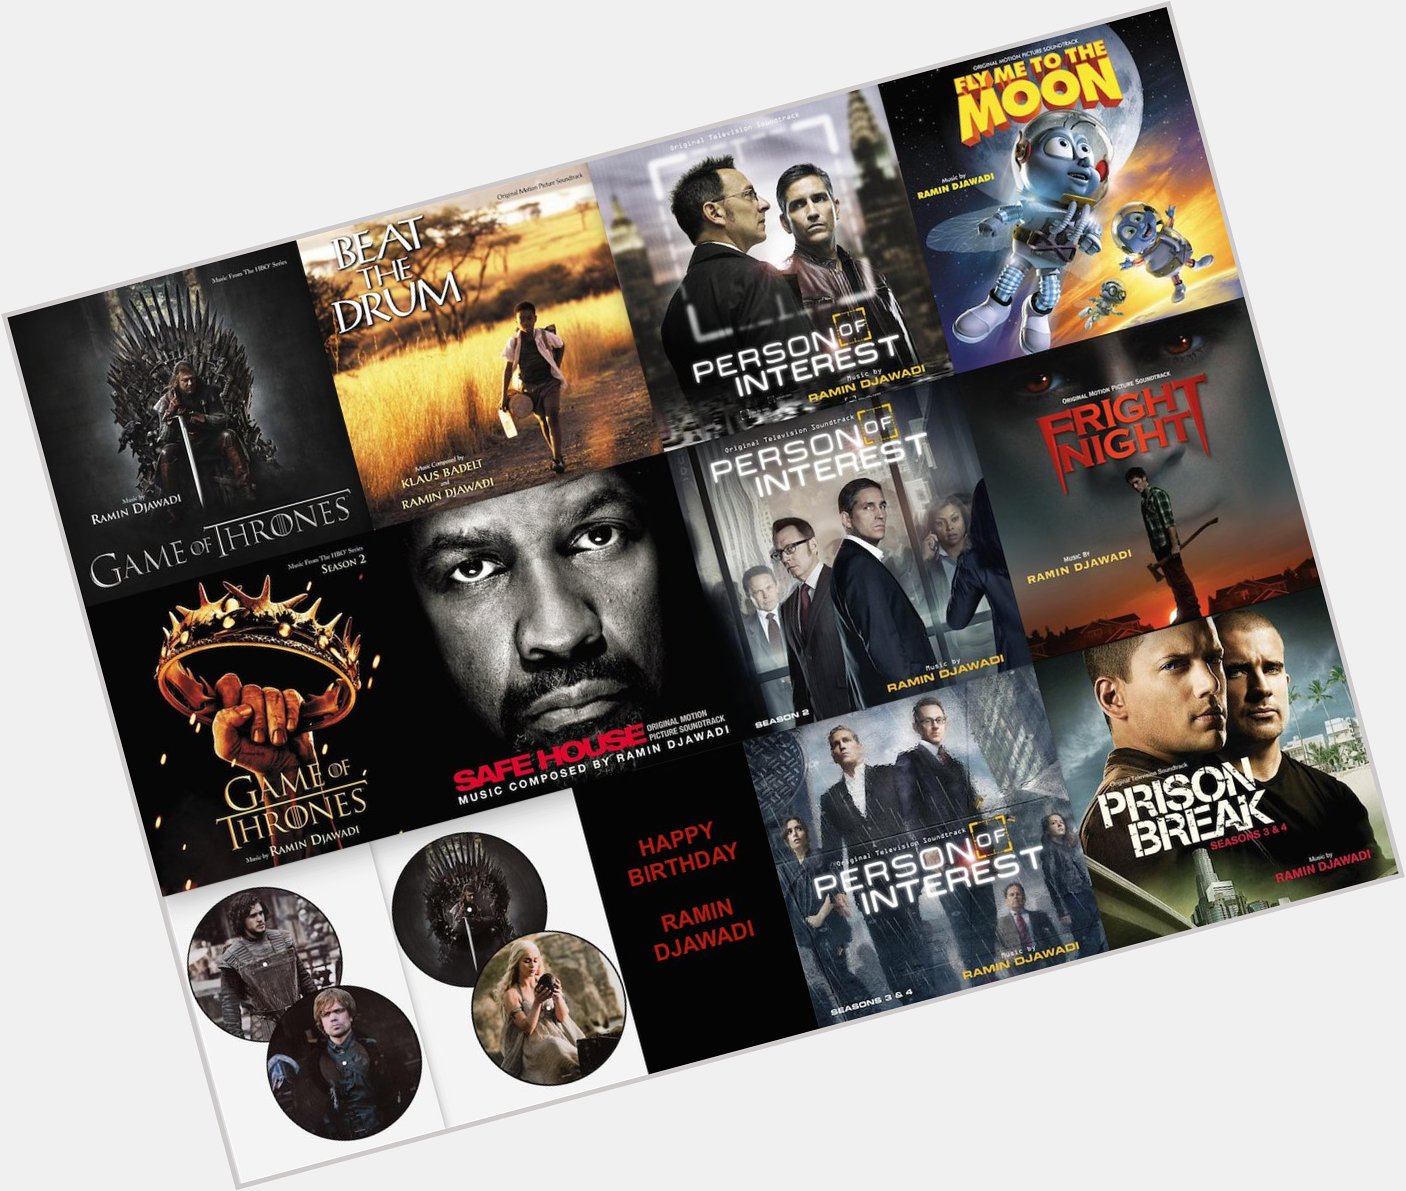 Happy Birthday composer Ramin Djawadi! So many great TV and Movie scores- what are your favorites? 